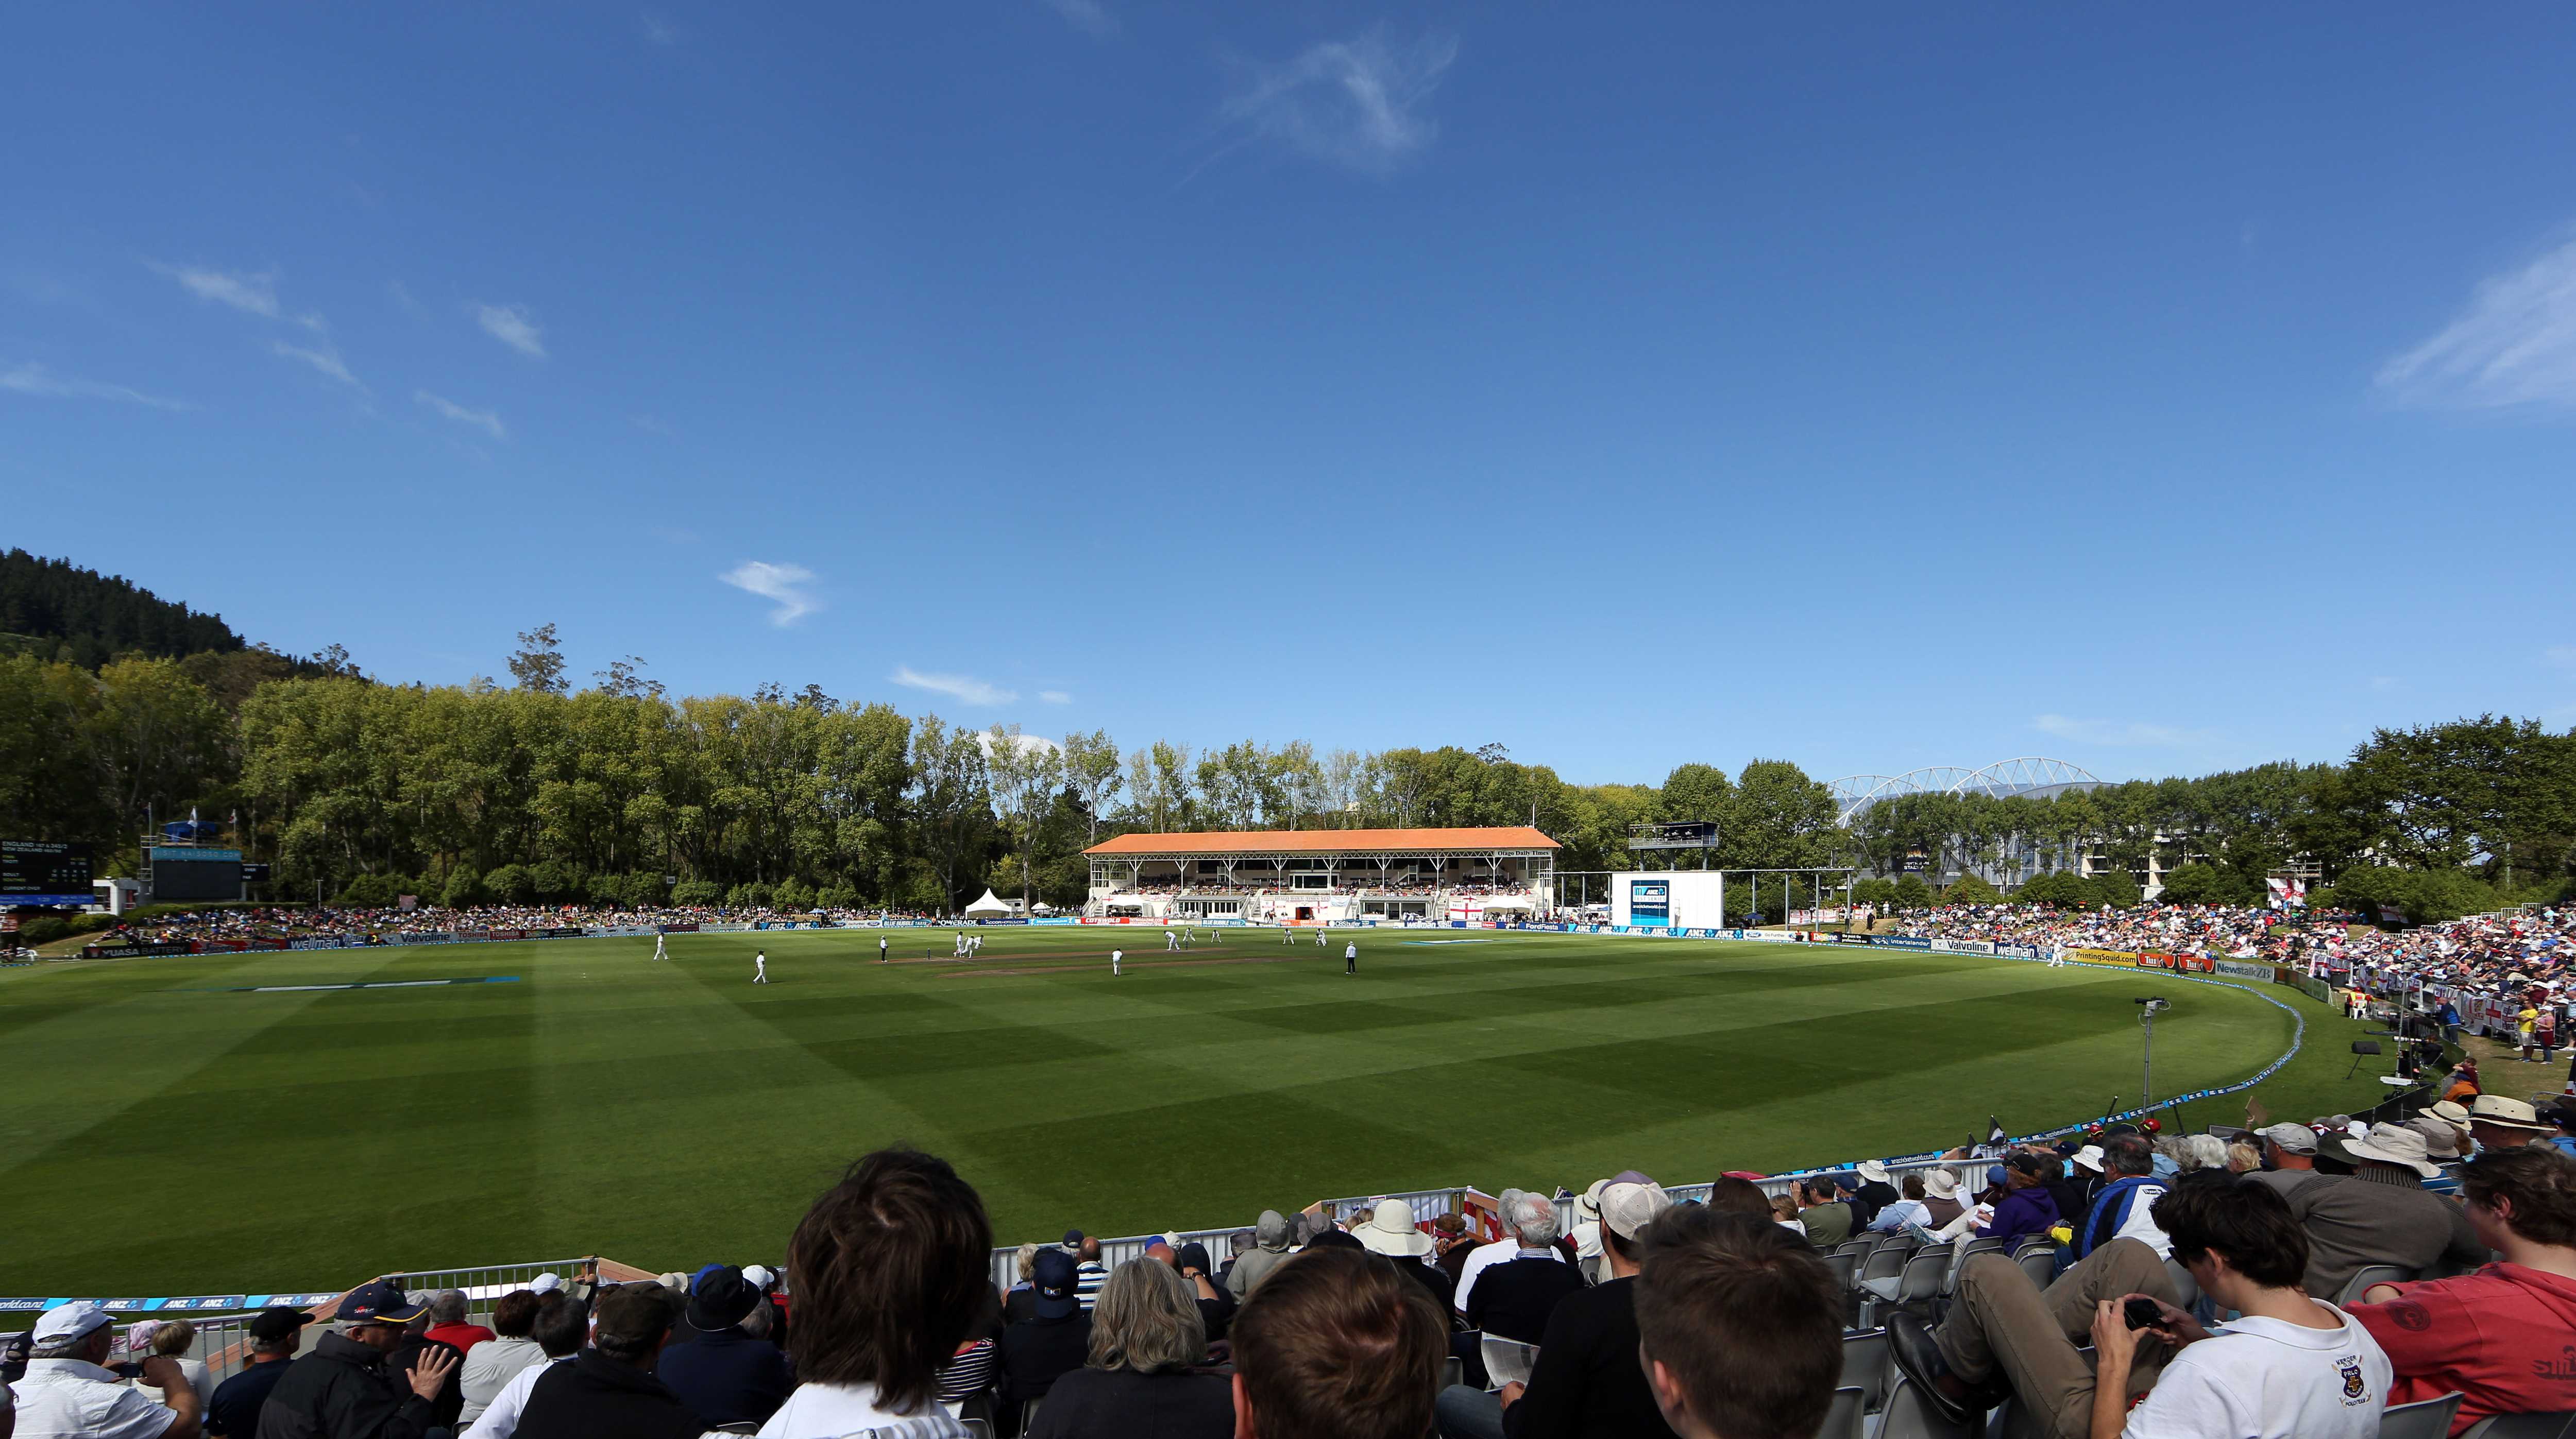 General view of the University Oval, Dunedin during day 5 of the test between NZ and England.
ANZ Test Series, New Zealand Black Caps v England, 1st Test Match, 10 March 2013, University Oval, Dunedin, New Zealand.
Photo: Rob Jefferies / photosport.co.nz